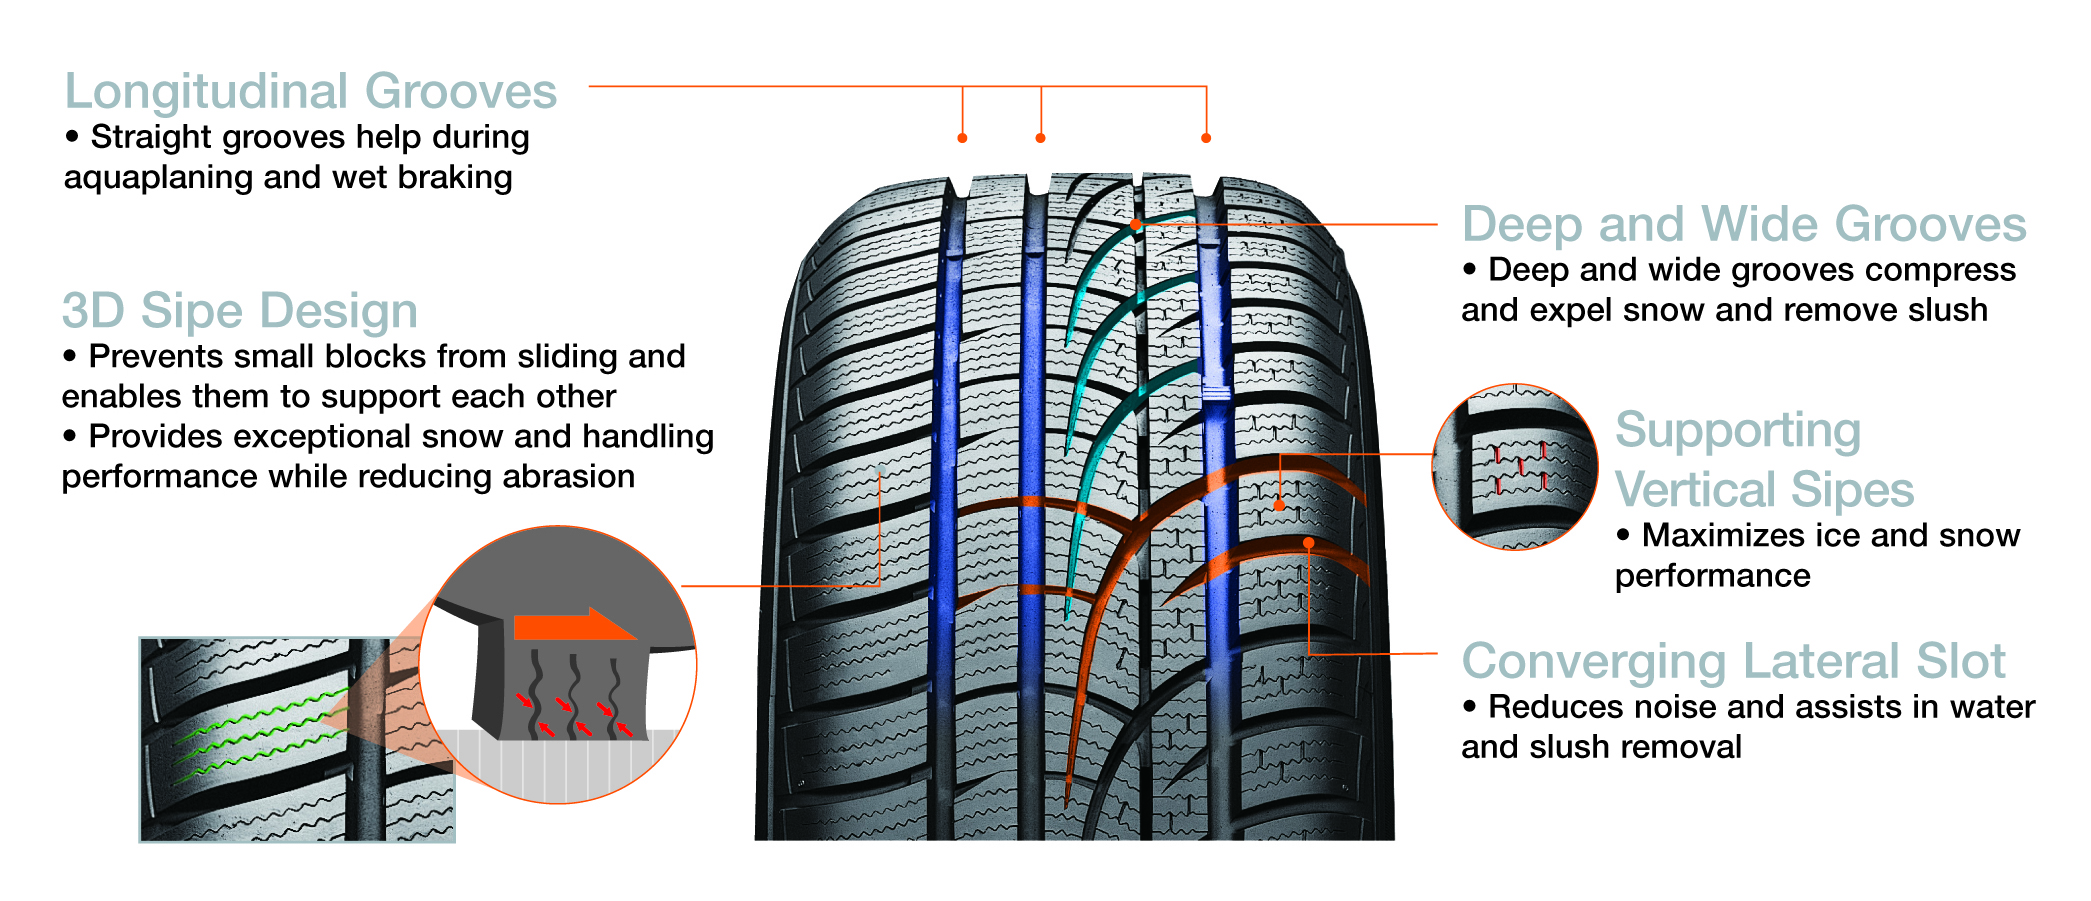 It’s worth knowing the anatomy of a winter tire